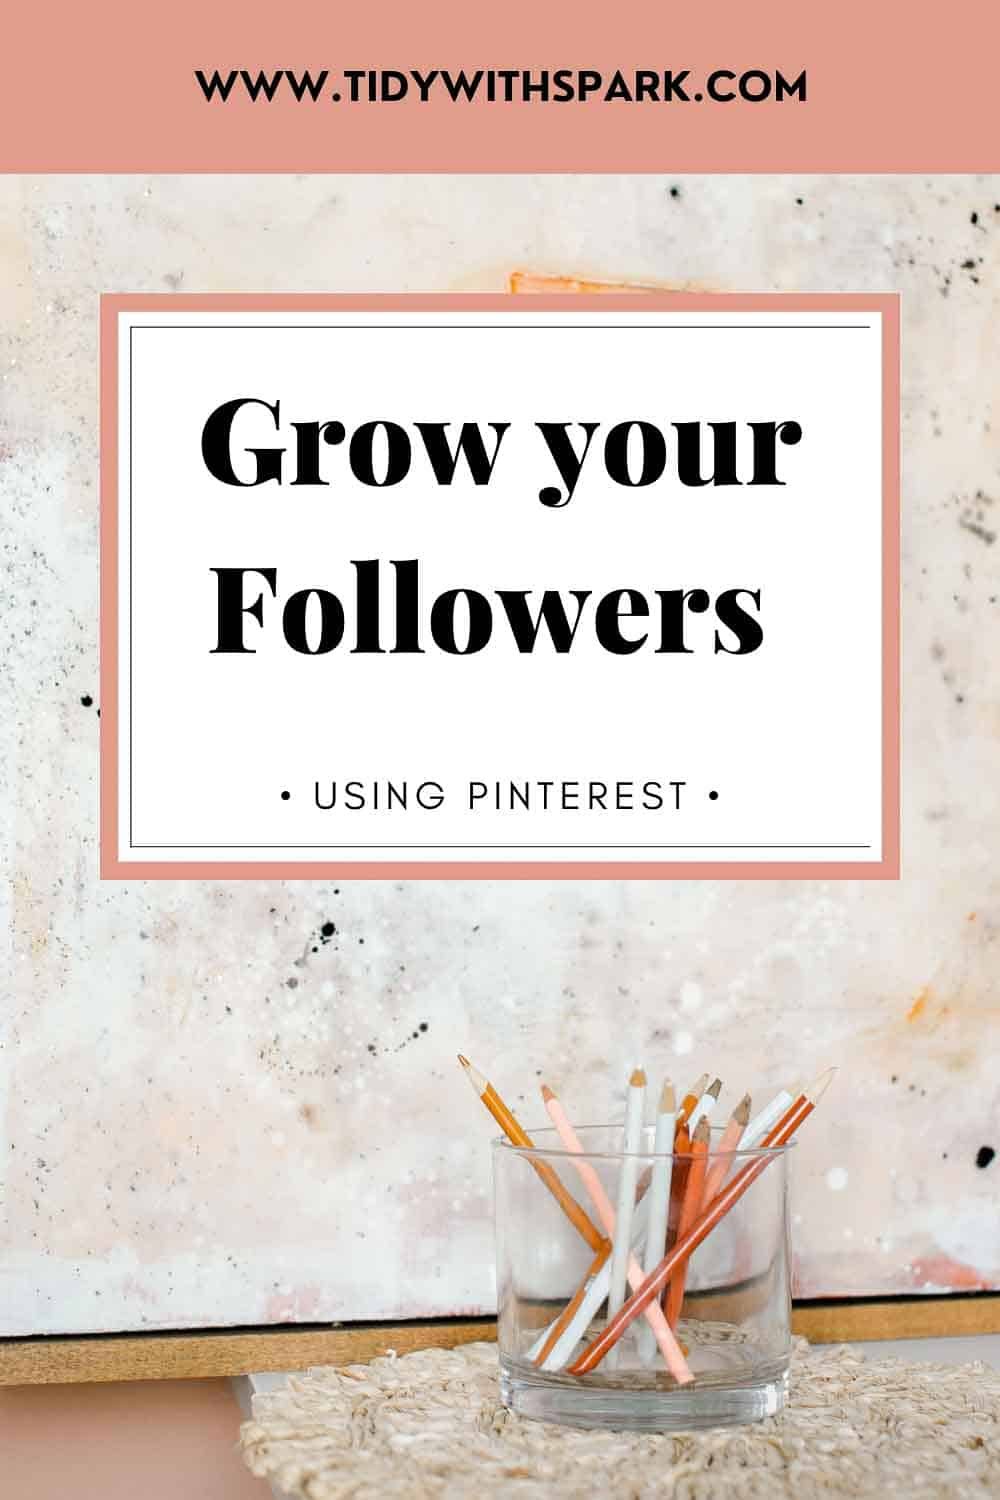 Promotional image sharing How to use Pinterest for marketing your business for Tidy with SPARK blog